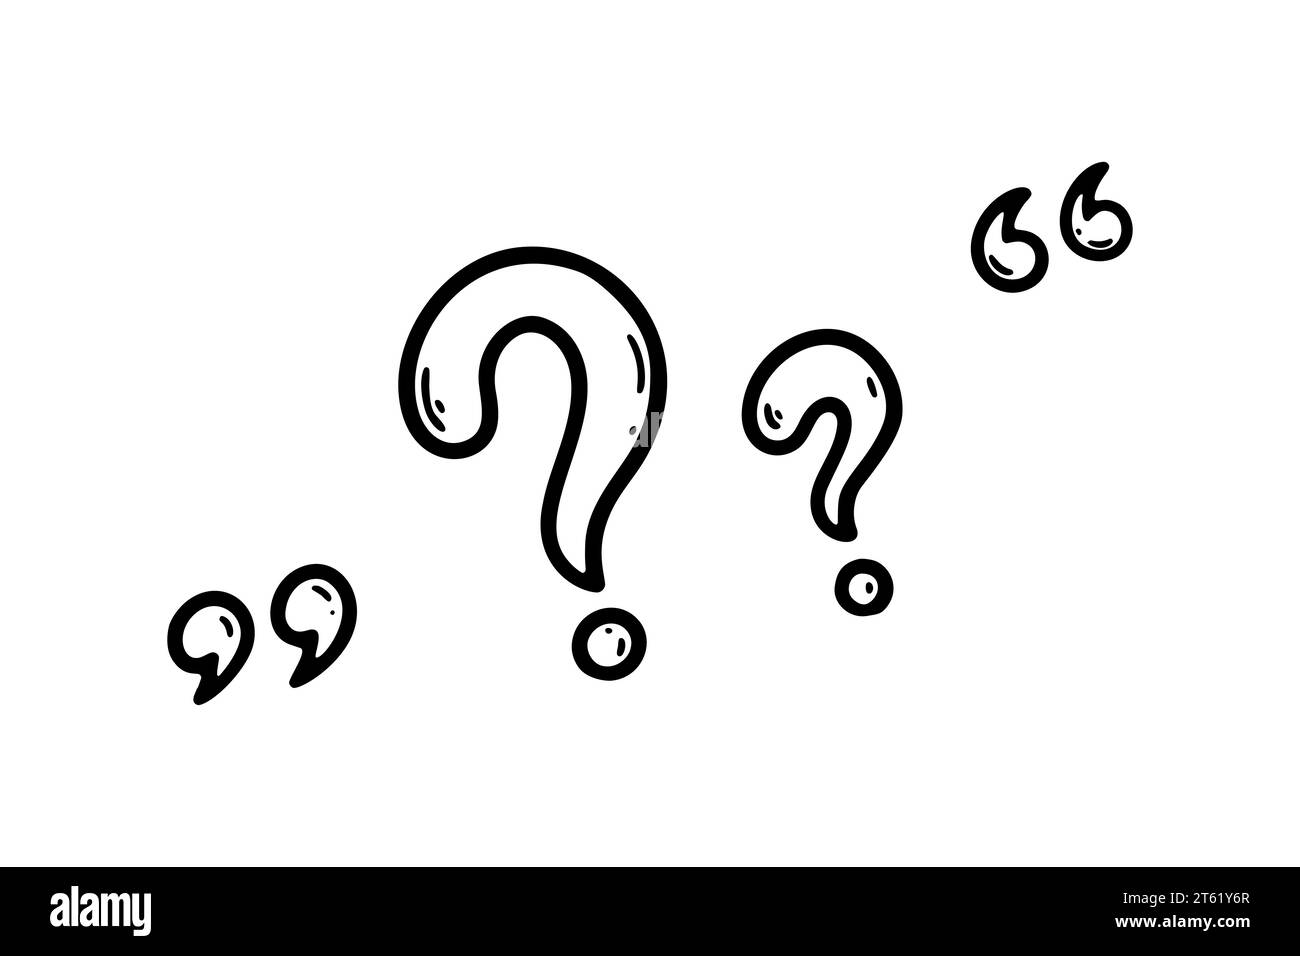 Handwritten question mark in sketch doodle style. Trouble, anxiety, doubt, confusion, misunderstanding symbol. Graphic ink punctuation icon Stock Vector